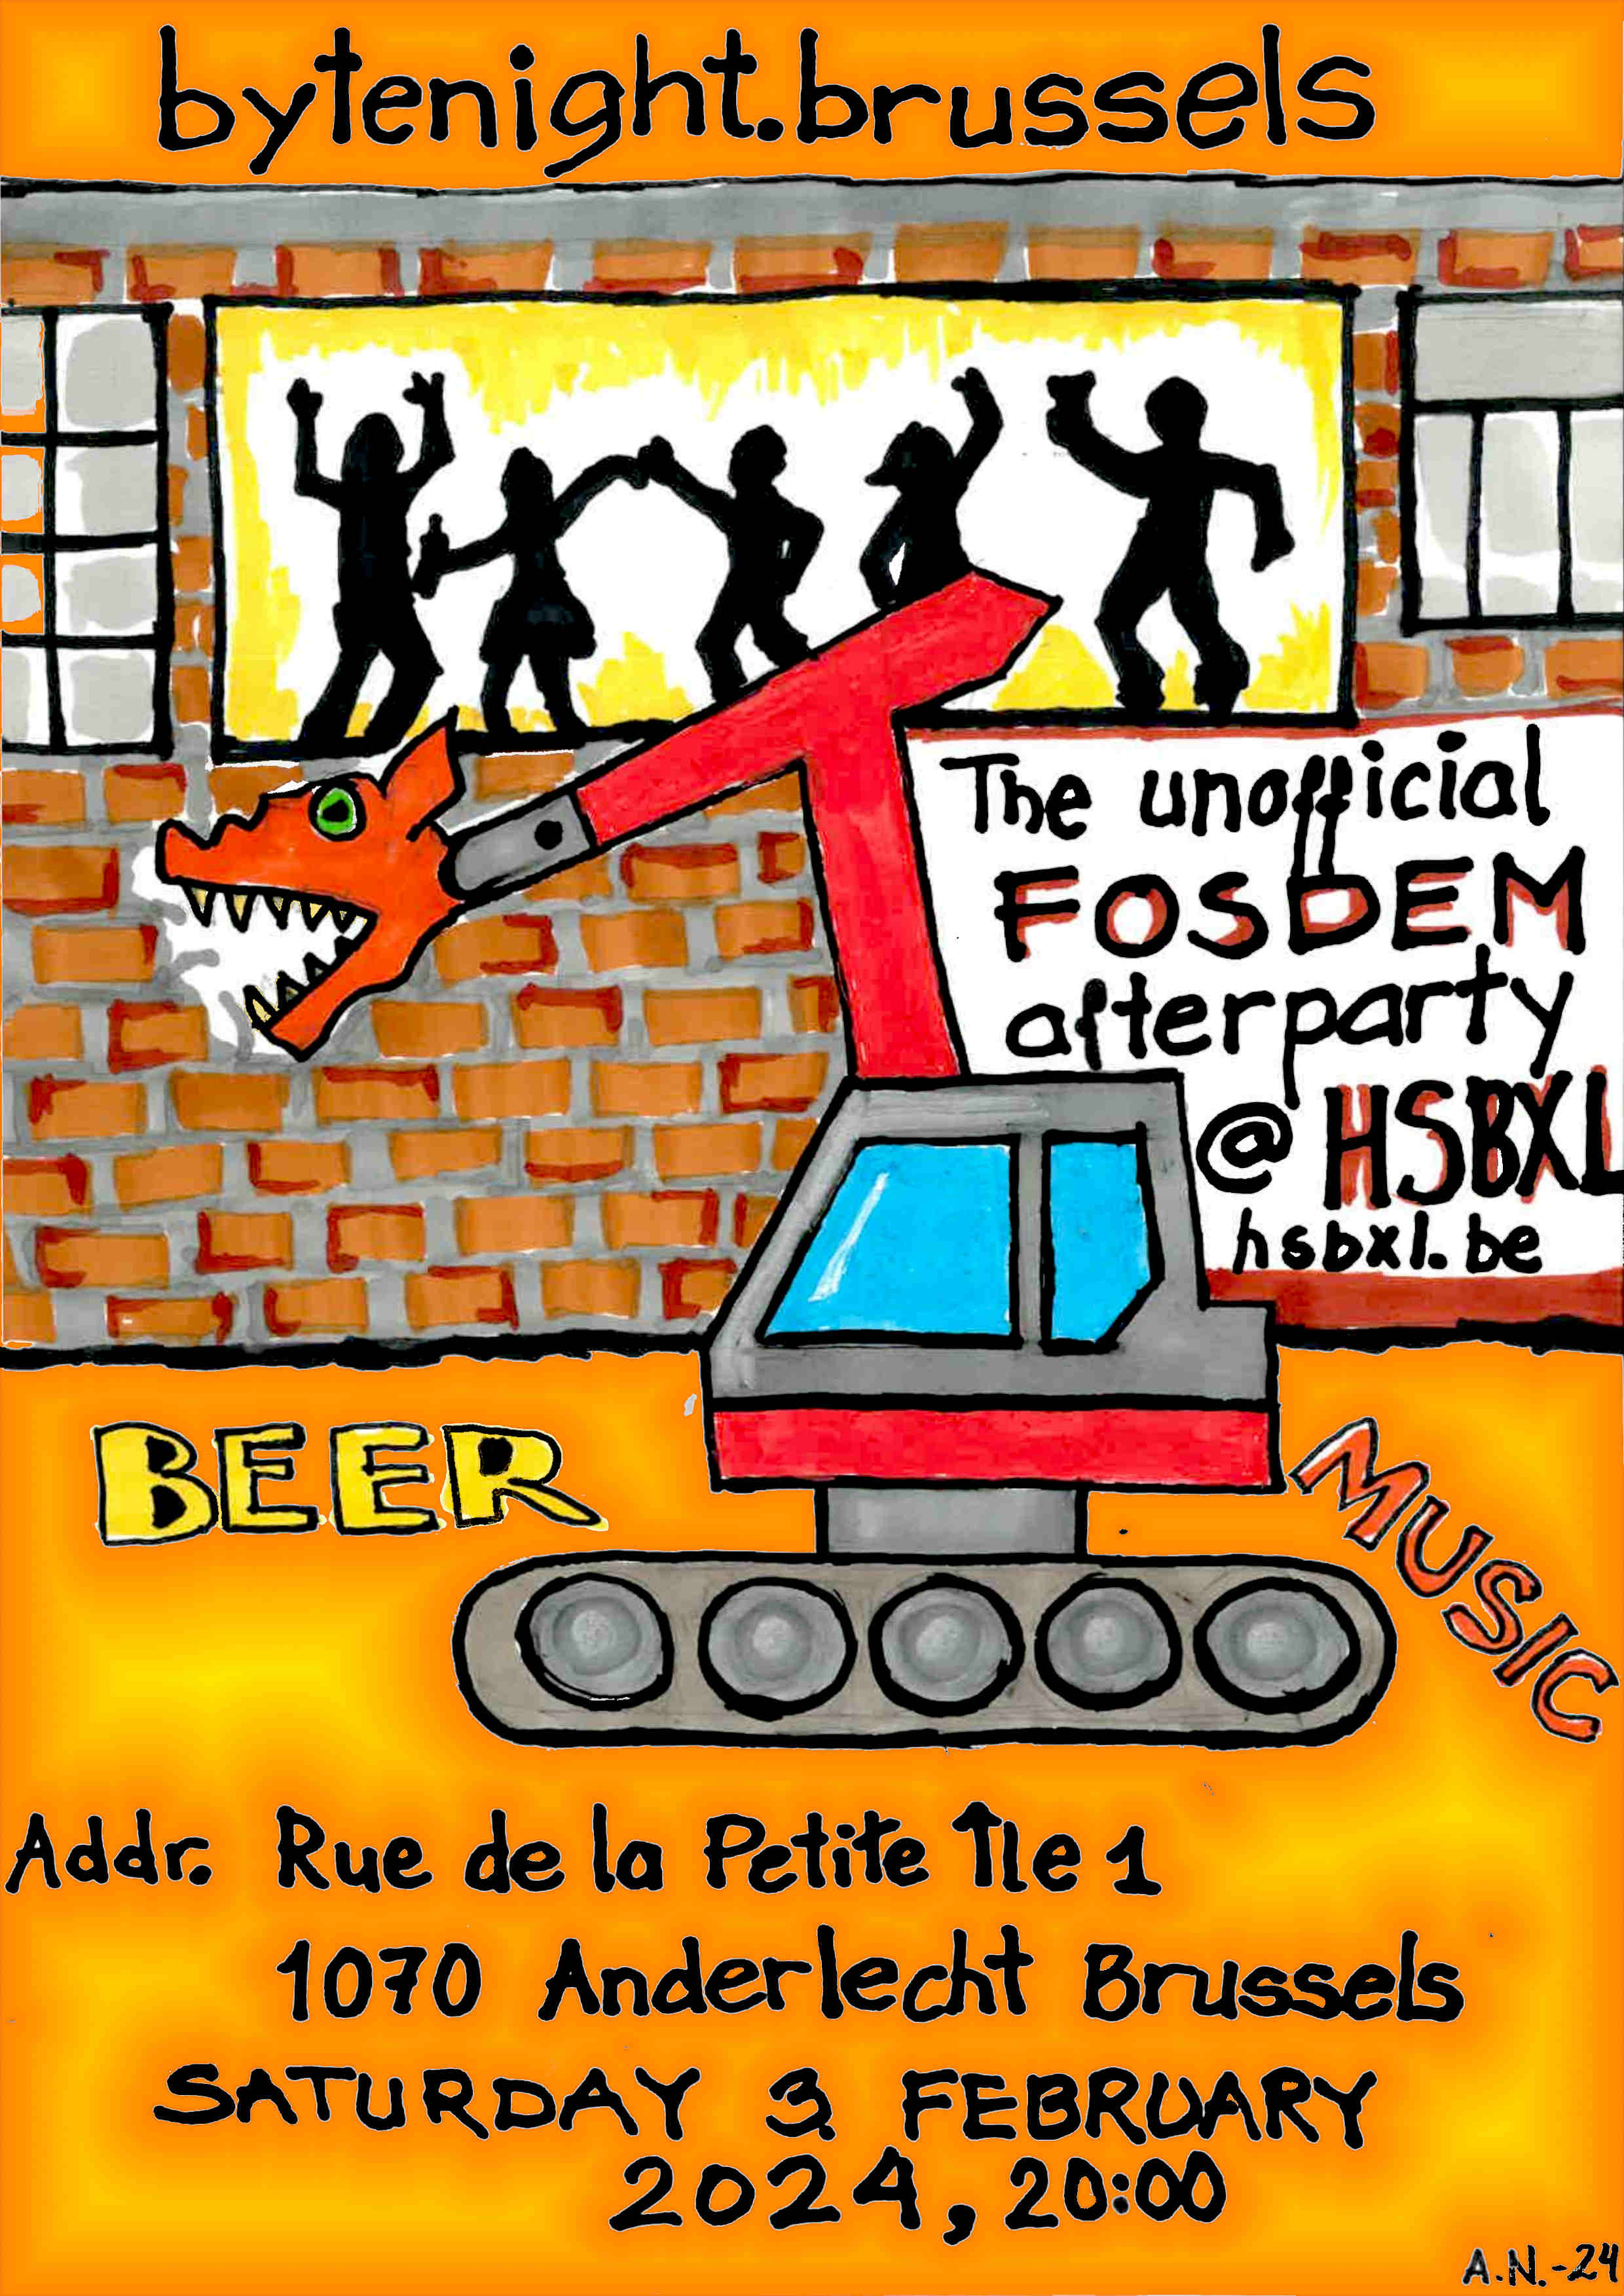 picture of a banner or logo from ByteNight, The unofficial FOSDEM afterparty